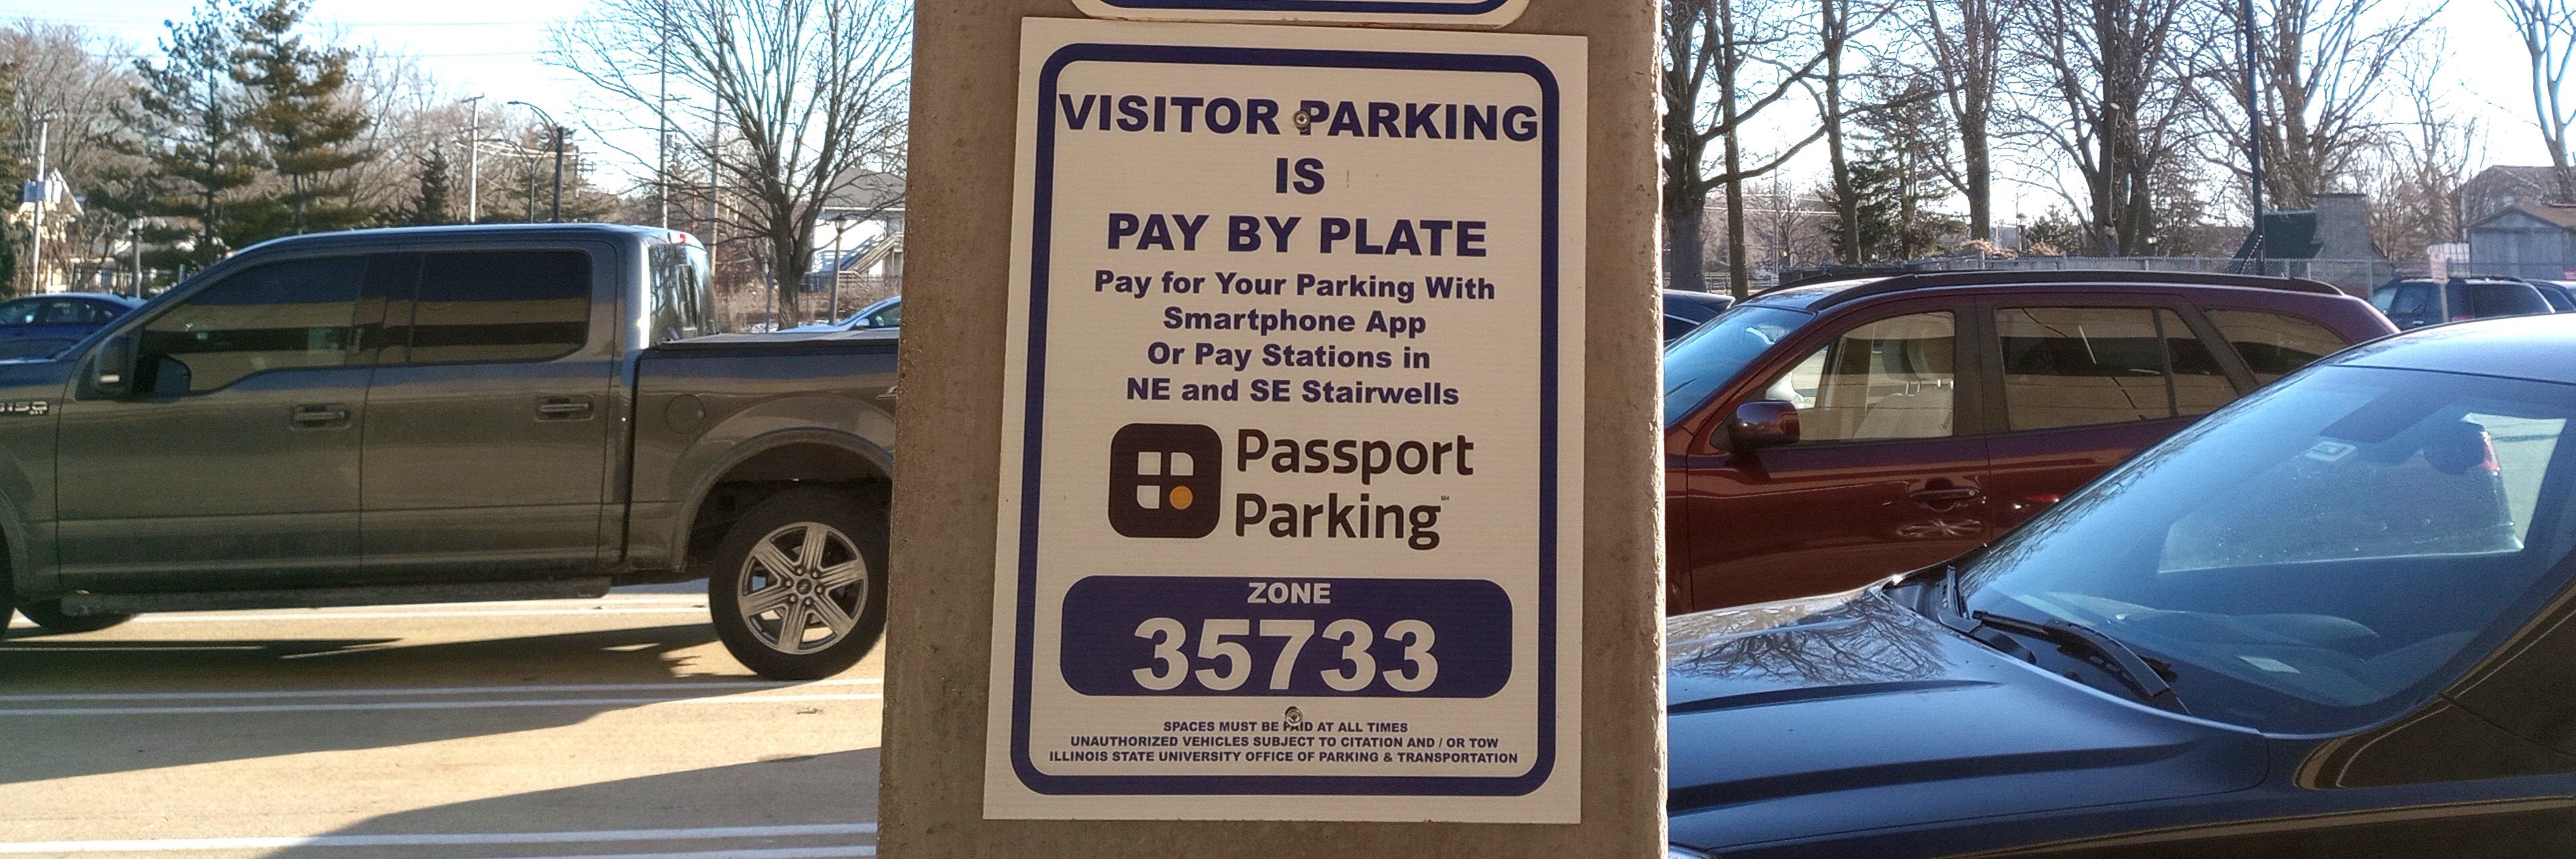 Photo of Paid Visitor parking sign.